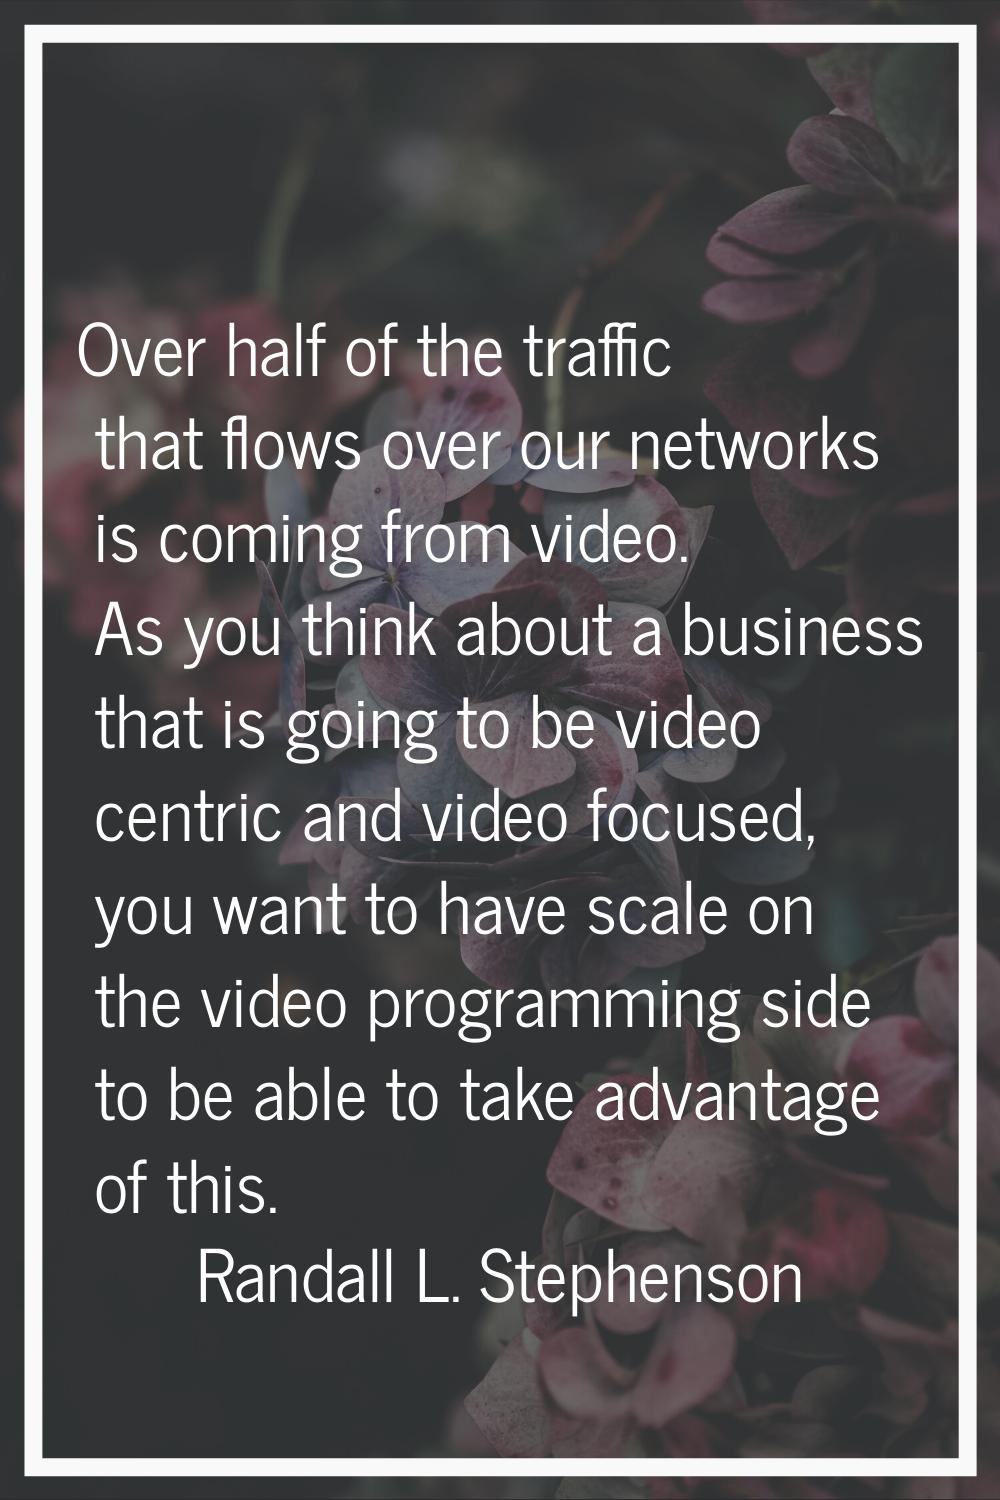 Over half of the traffic that flows over our networks is coming from video. As you think about a bu